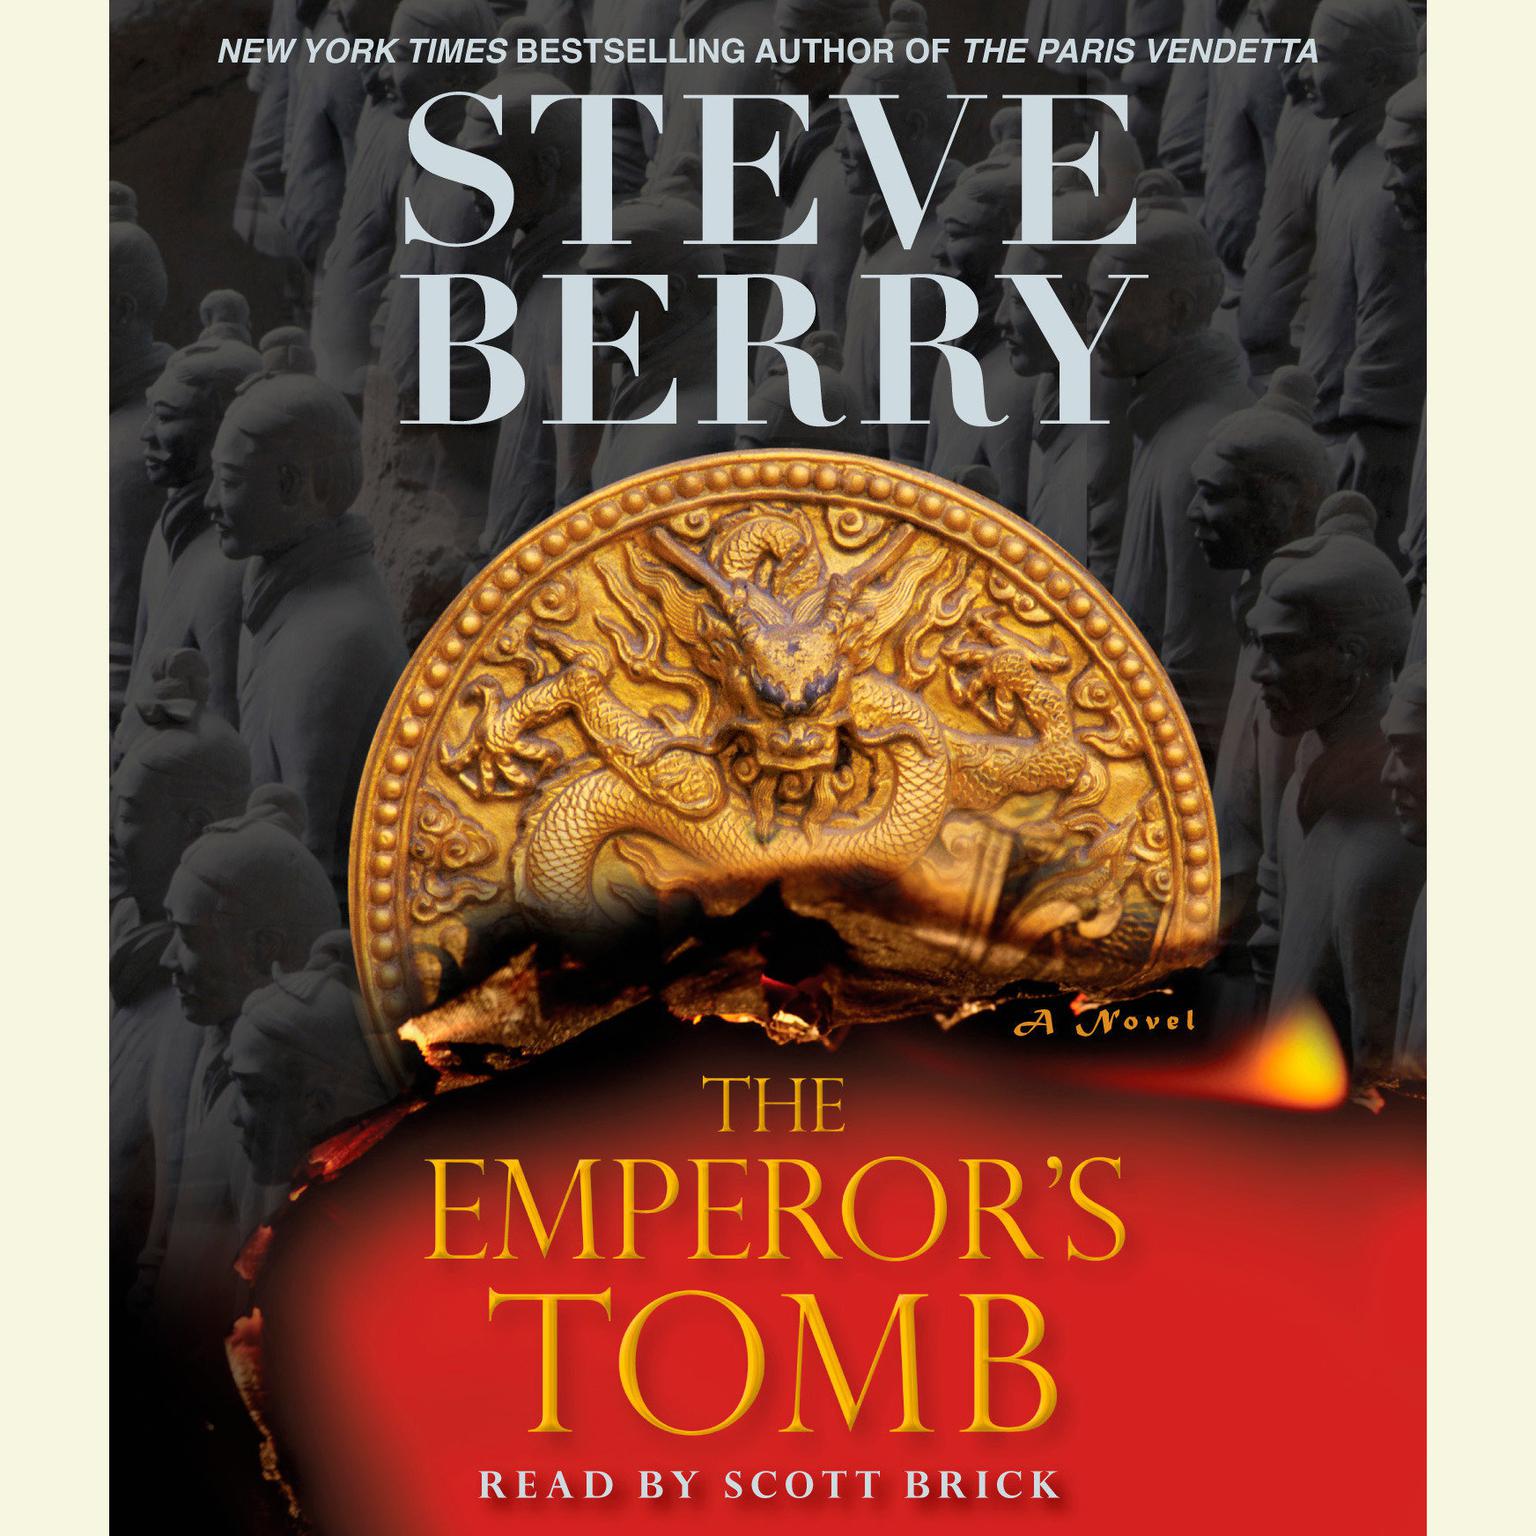 The Emperors Tomb (Abridged) Audiobook, by Steve Berry